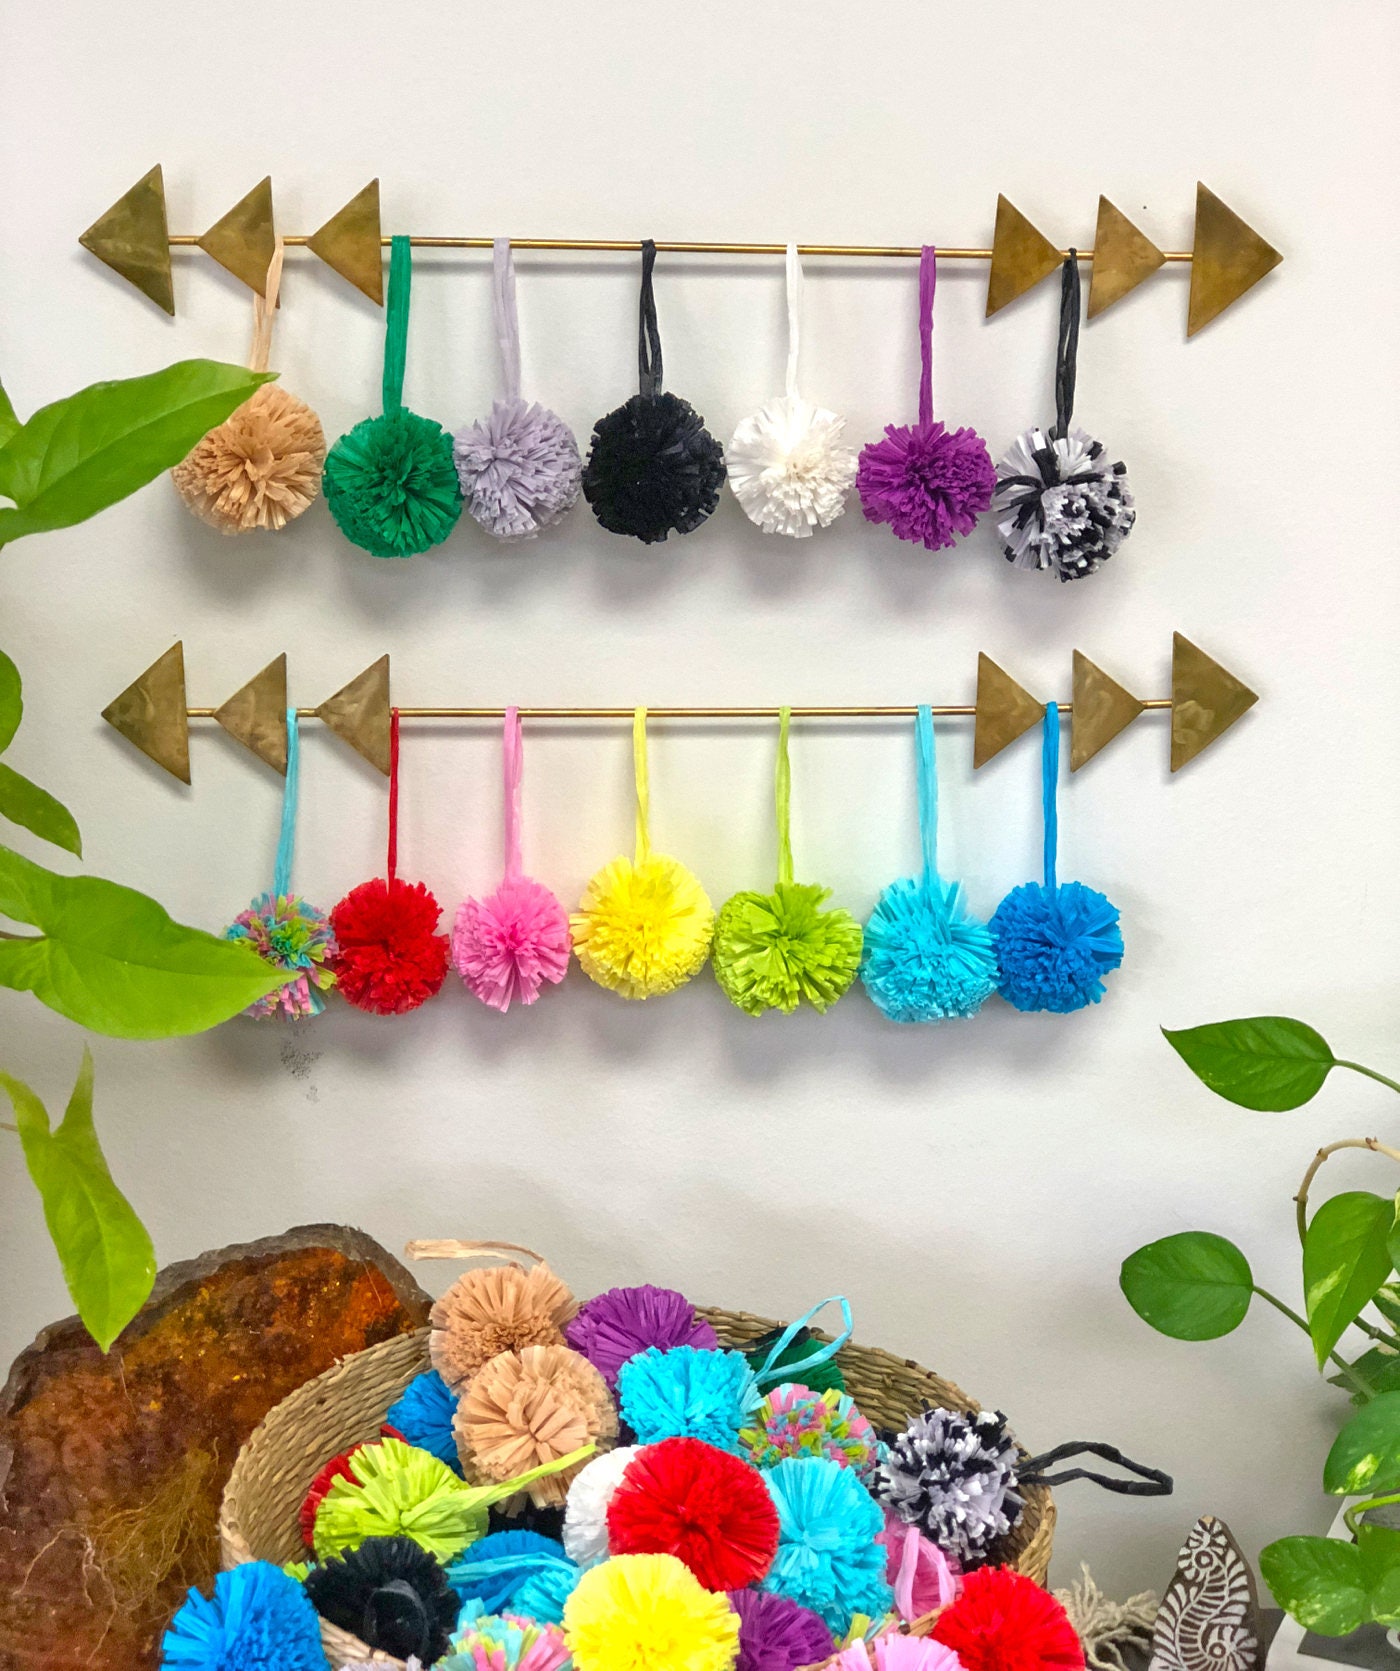 How to Make Pom Poms 5 Ways and How to Use Them - Our Daily Craft